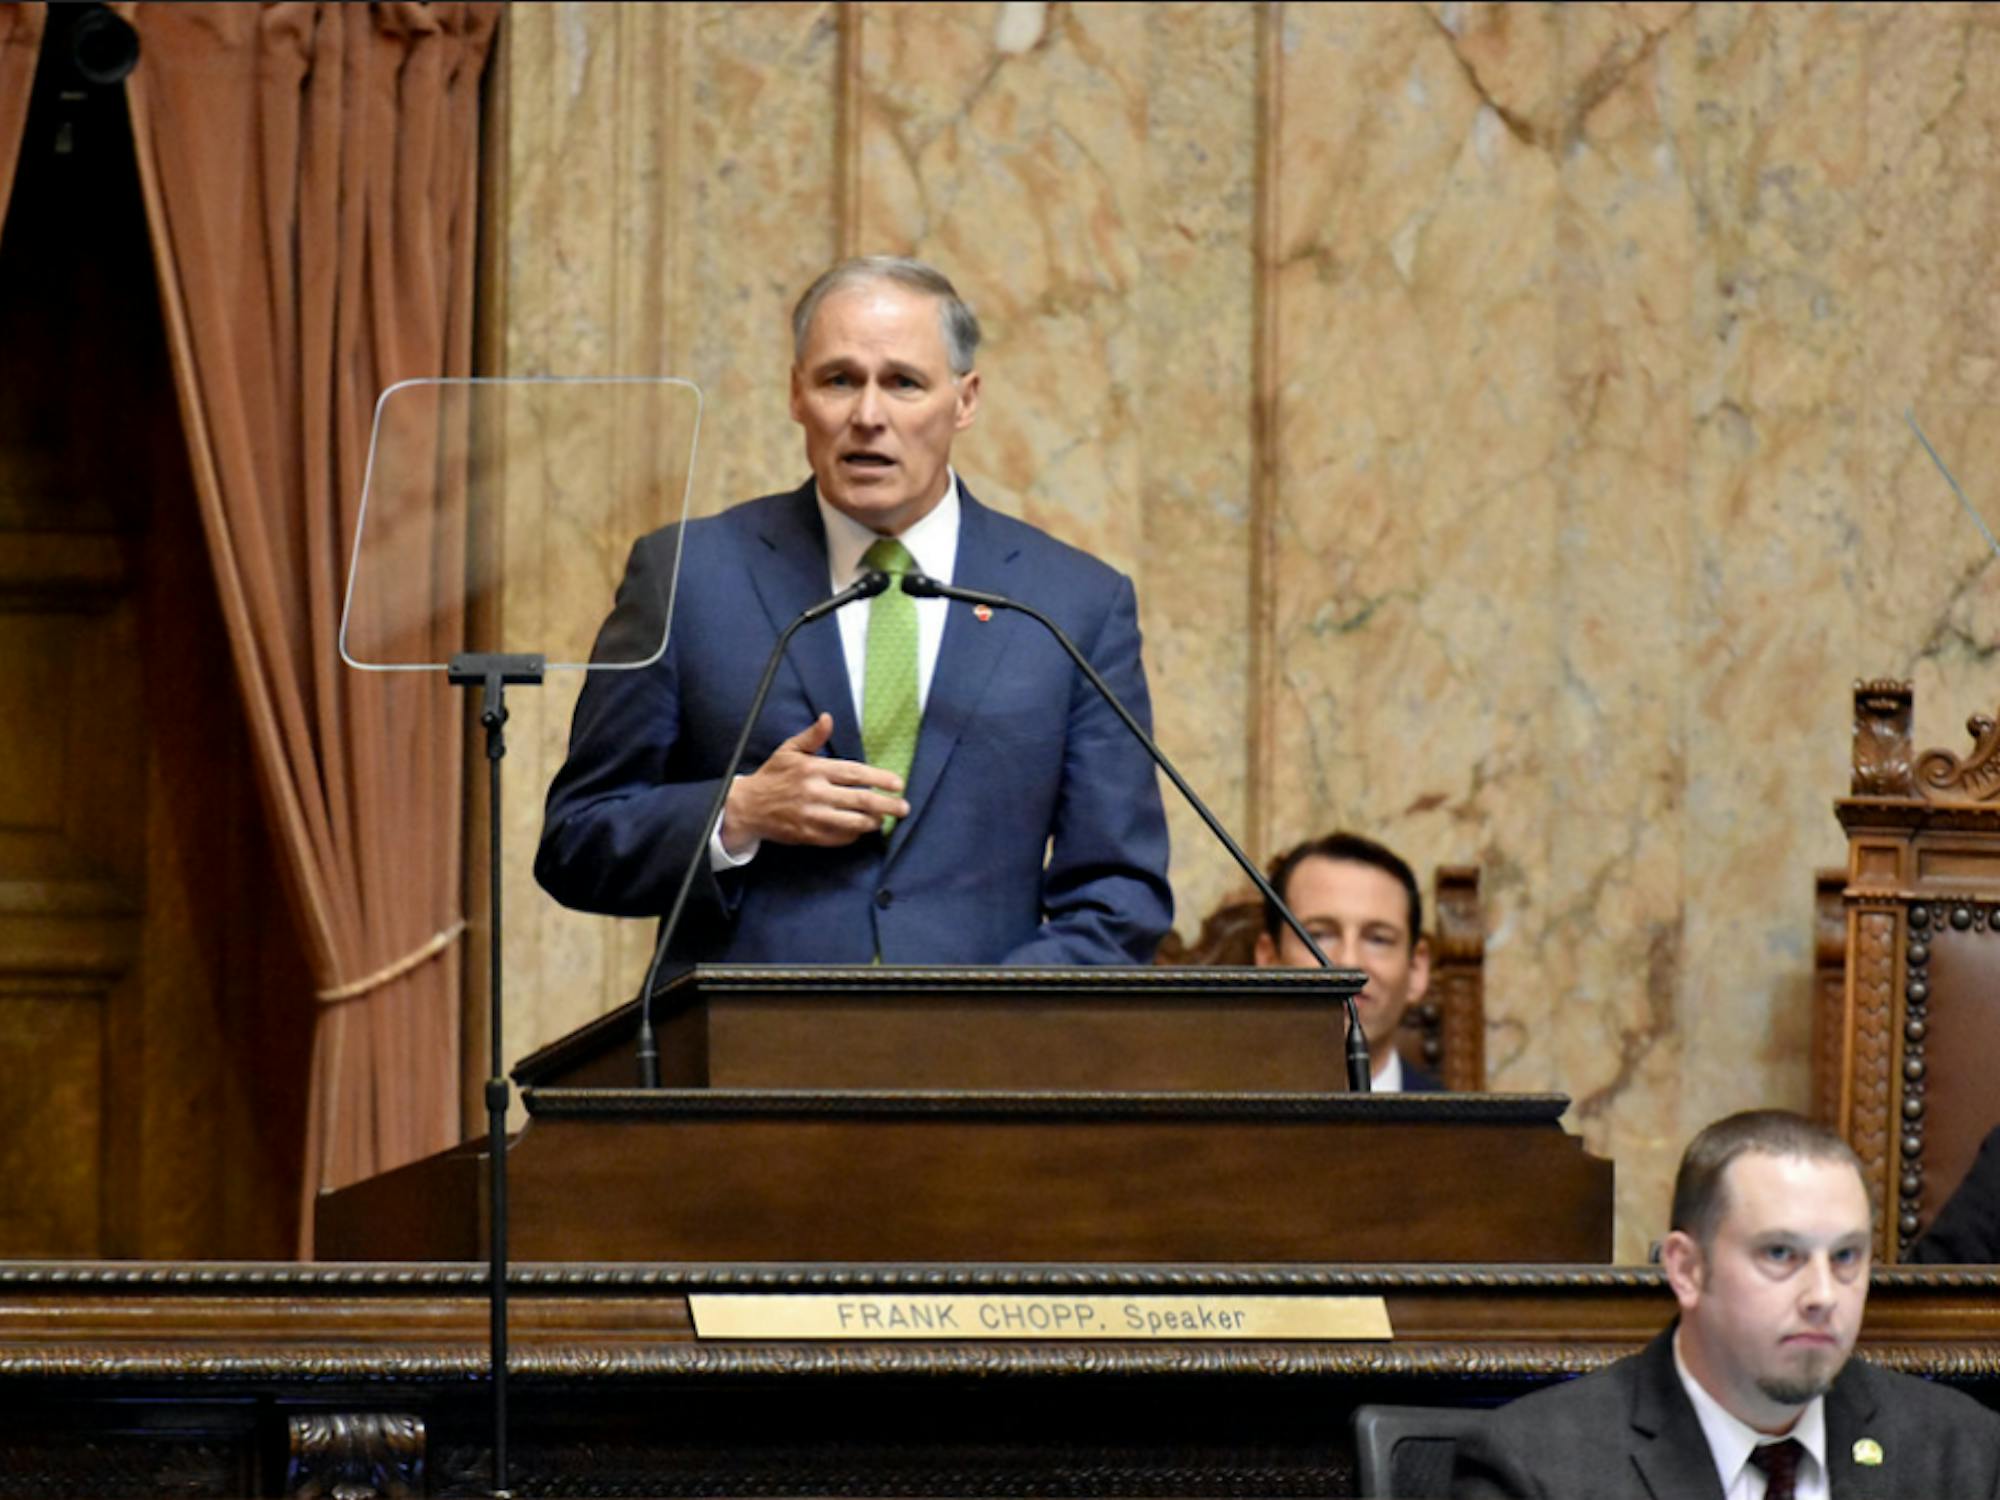 Inslee at the State of the State address in Washington 2019